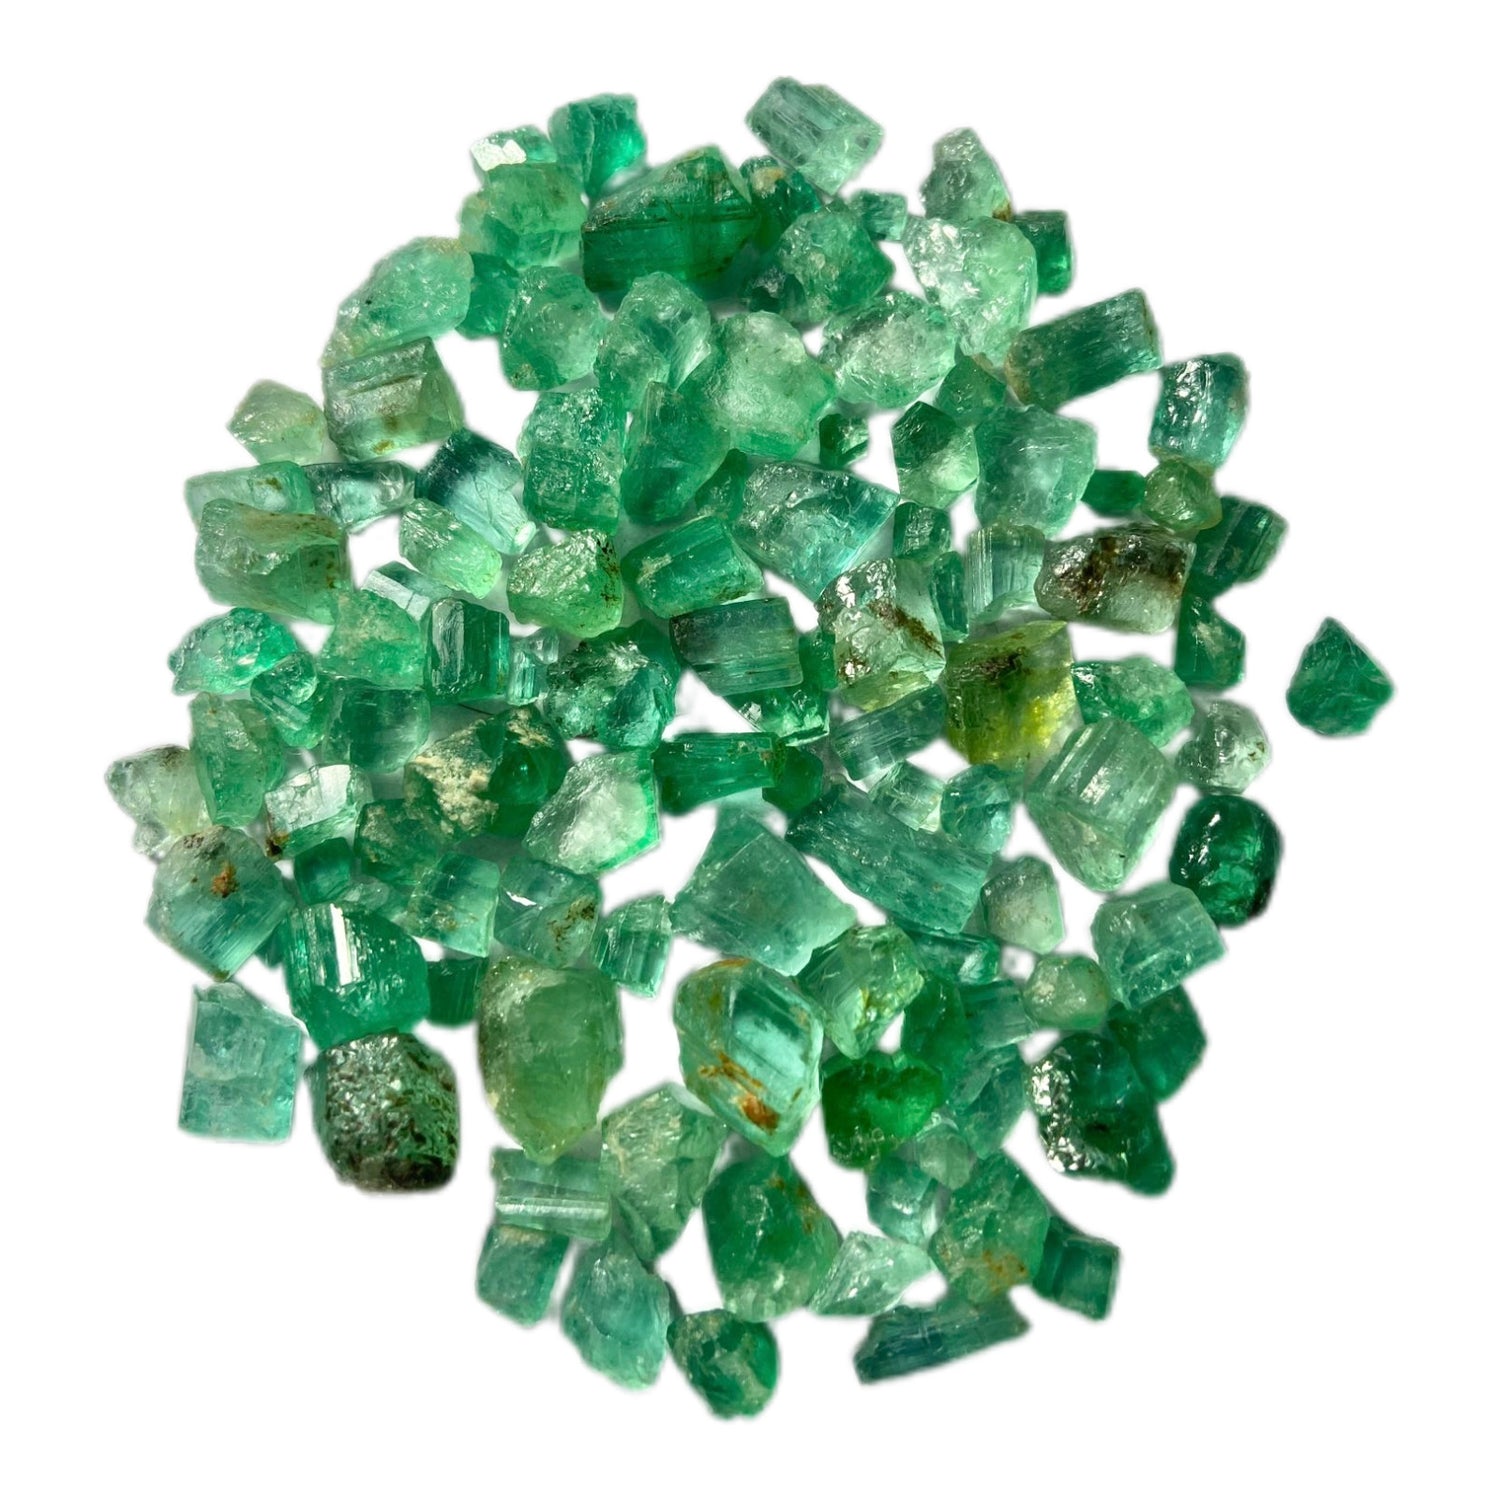 150 Carats Rough Emerald Stones for Faceting